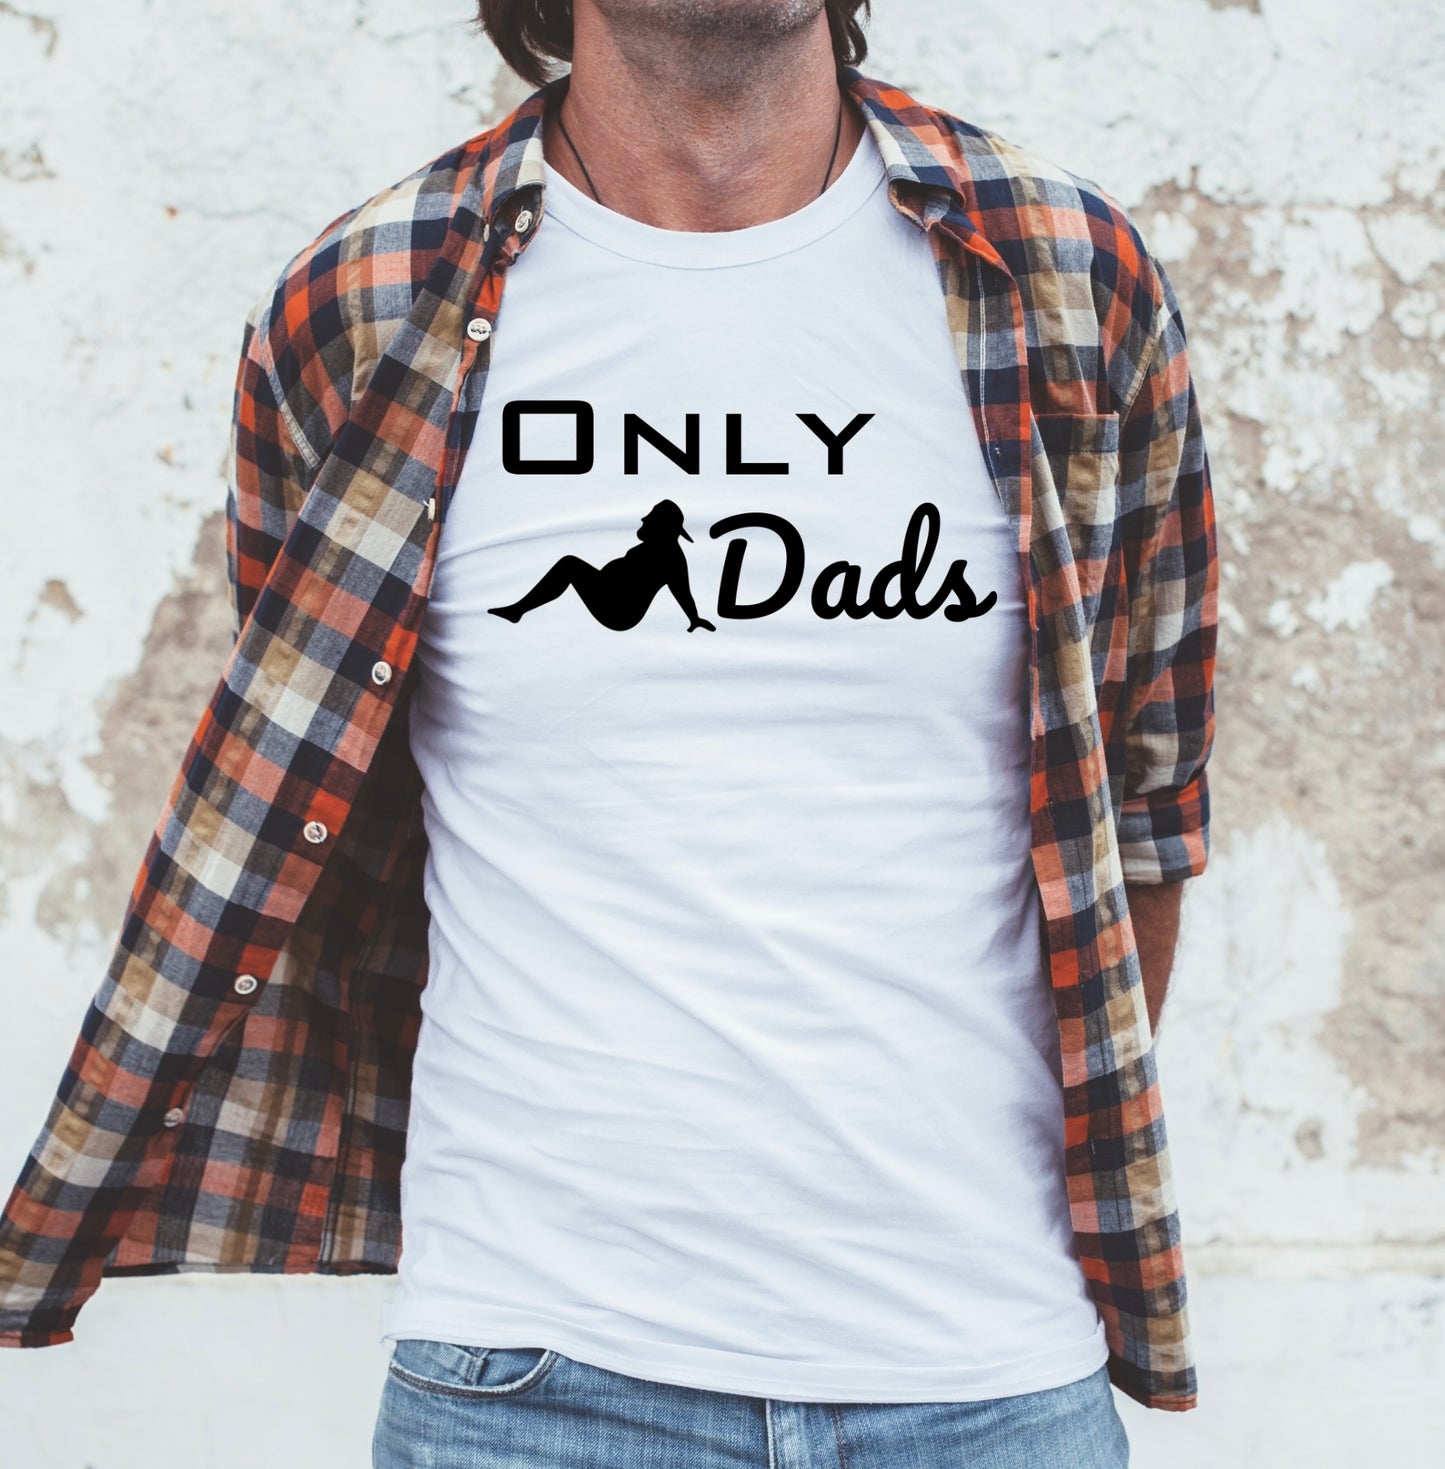 "Only Dads" printed unisex heavy cotton t-shirt for stylish fathers.